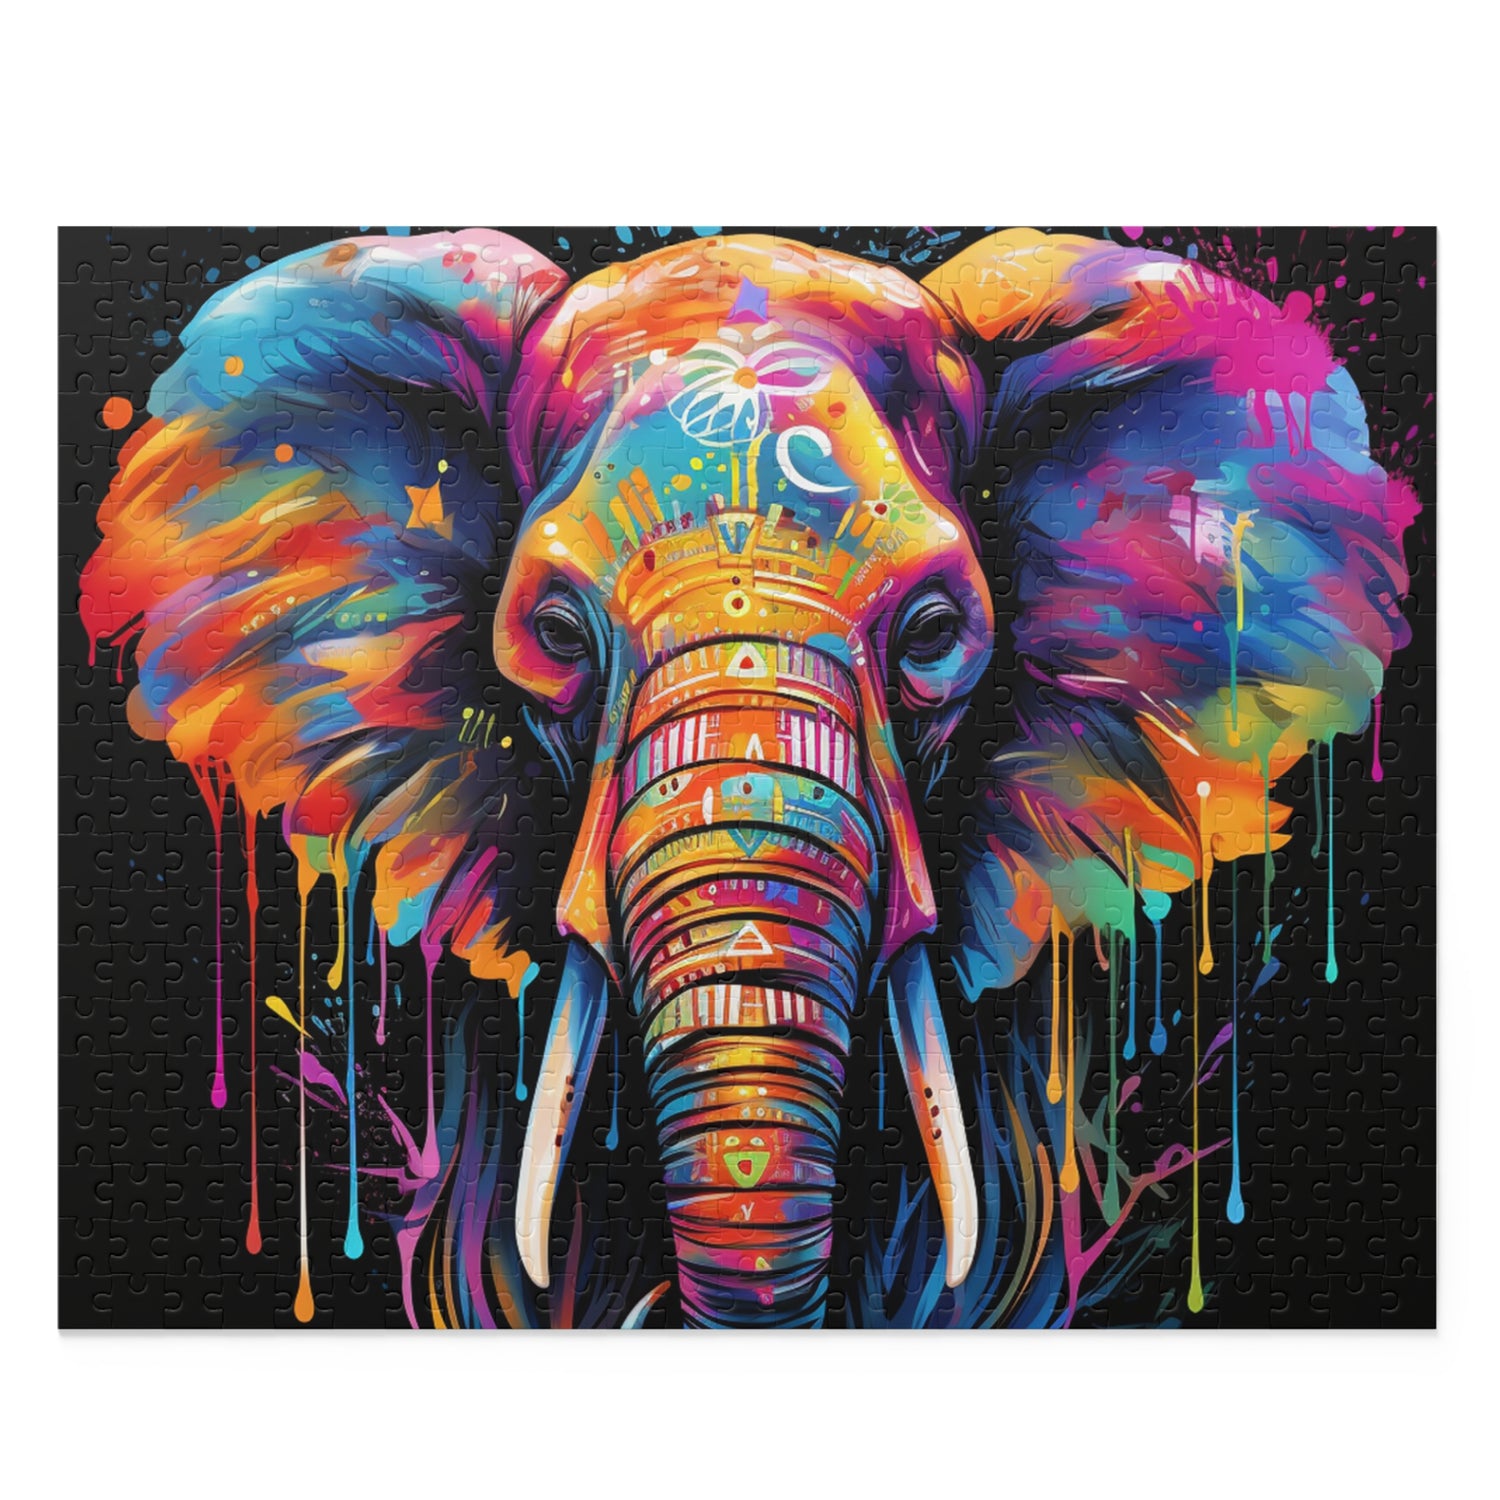 Abstract Trippy Elephant Jigsaw Puzzle for Girls, Boys, Kids Adult Birthday Business Jigsaw Puzzle Gift for Him Funny Humorous Indoor Outdoor Game Gift For Her Online-1